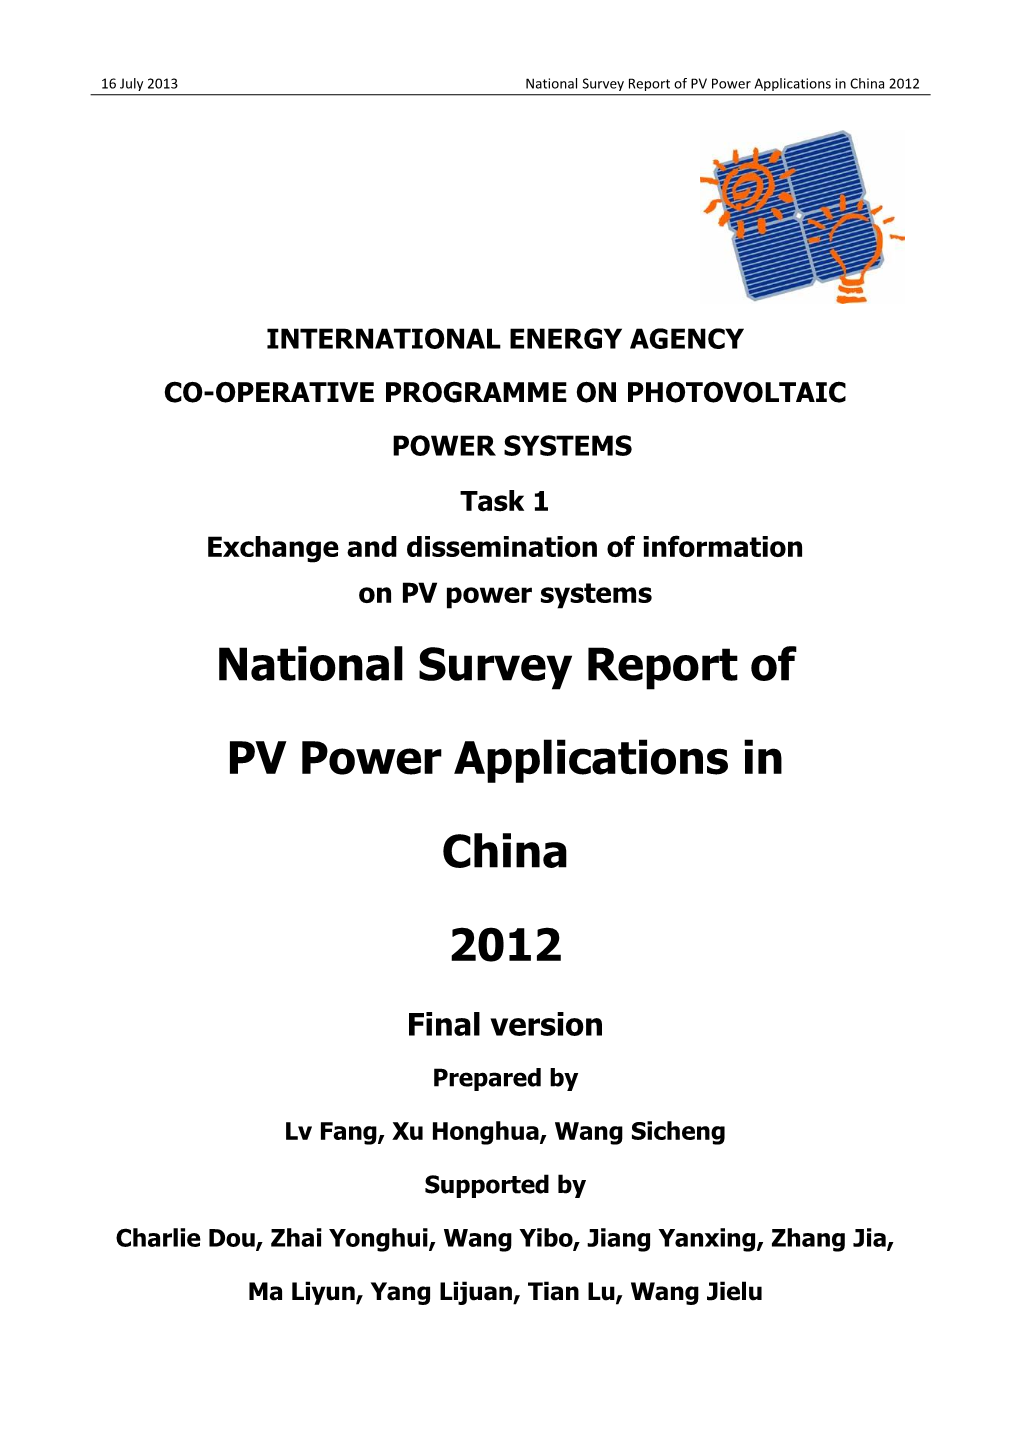 International Energy Agency Co-Operative Programme on Photovoltaic Power Systems